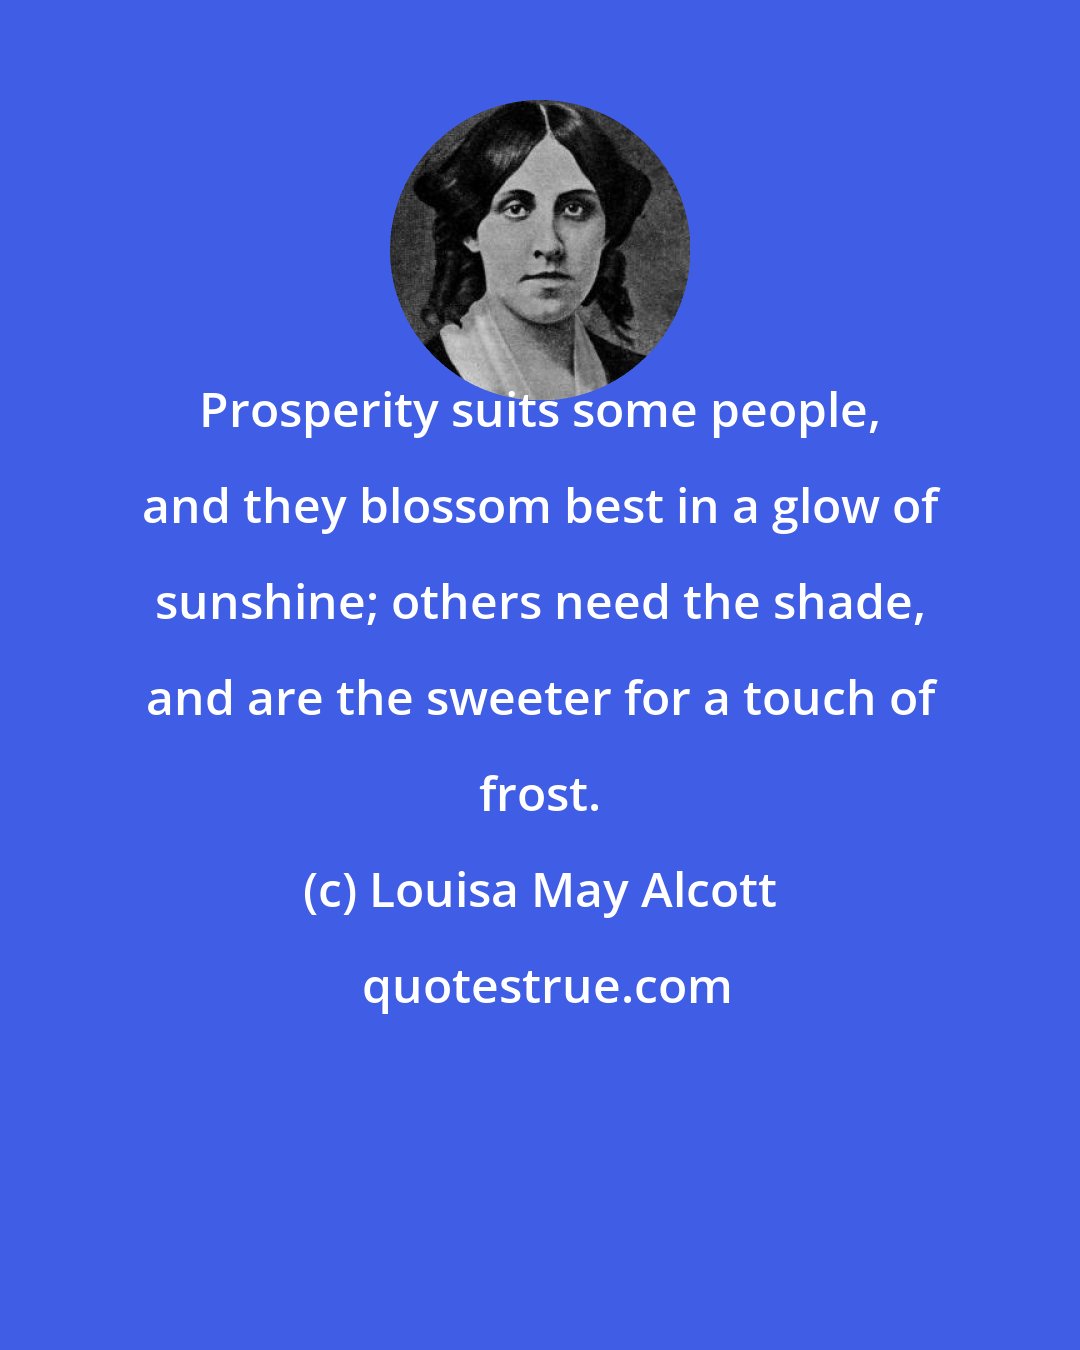 Louisa May Alcott: Prosperity suits some people, and they blossom best in a glow of sunshine; others need the shade, and are the sweeter for a touch of frost.